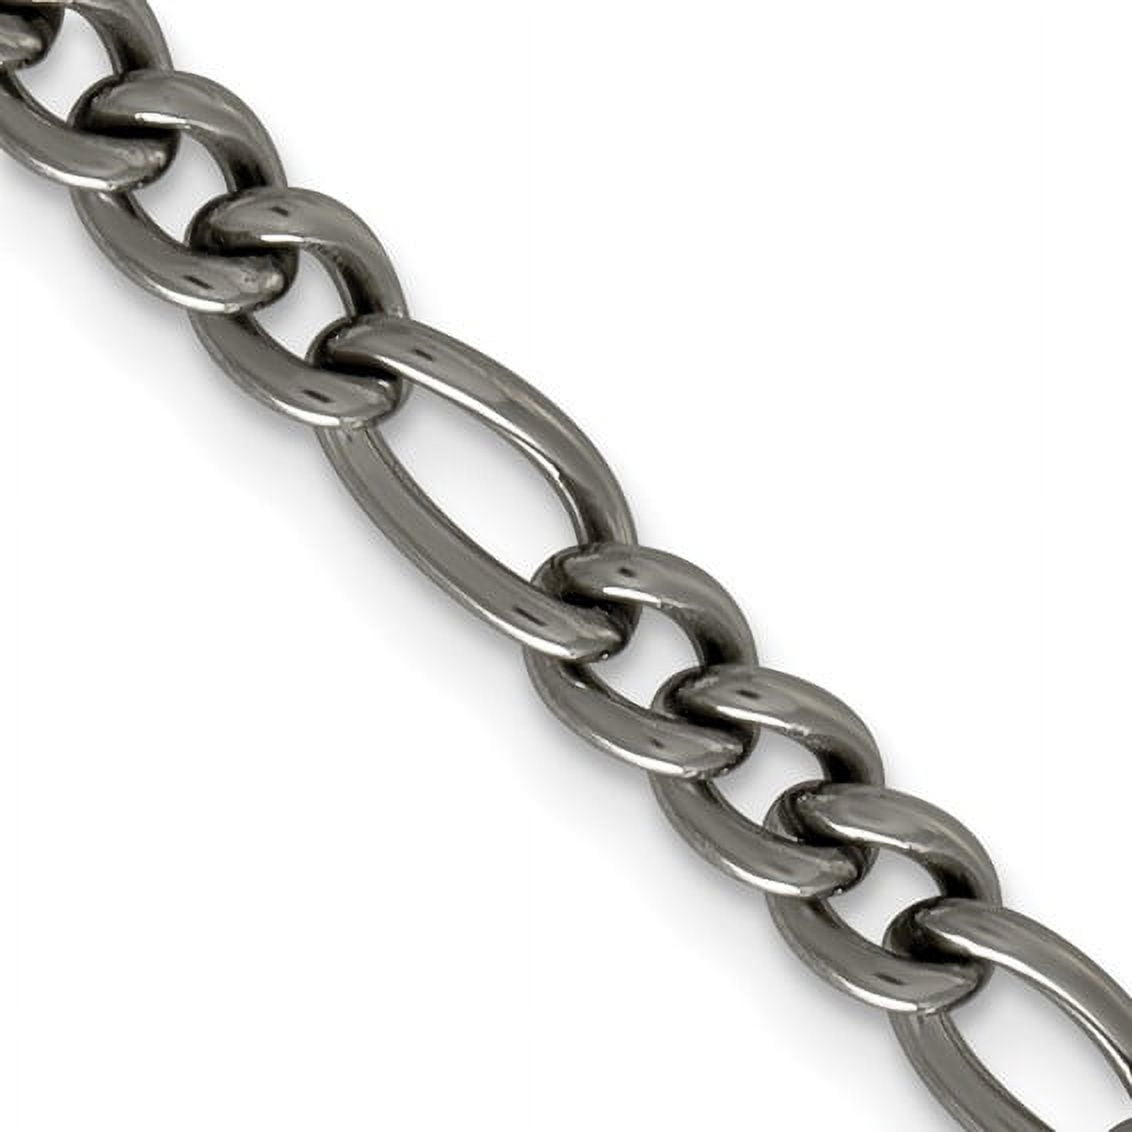 Stylish Titanium Chain Cuban Link Mens Silver Chain Necklace For Men With  Curb Detail And Stainless Steel Construction From Reno_1124, $27.75 |  DHgate.Com